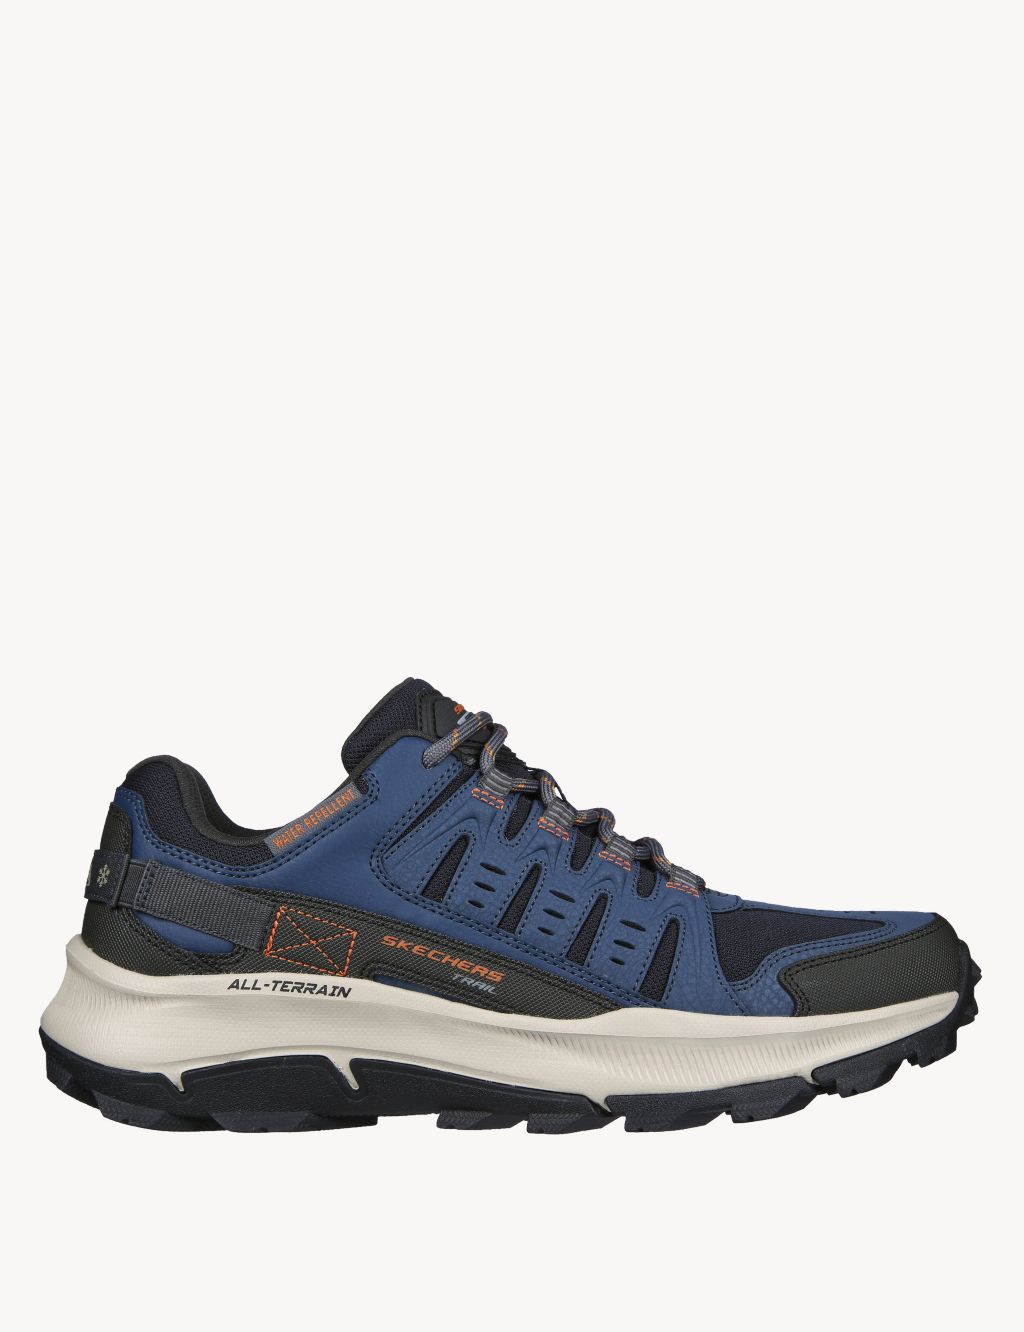 Equalizer 5.0 Trail Solix Lace Up Trainers image 1